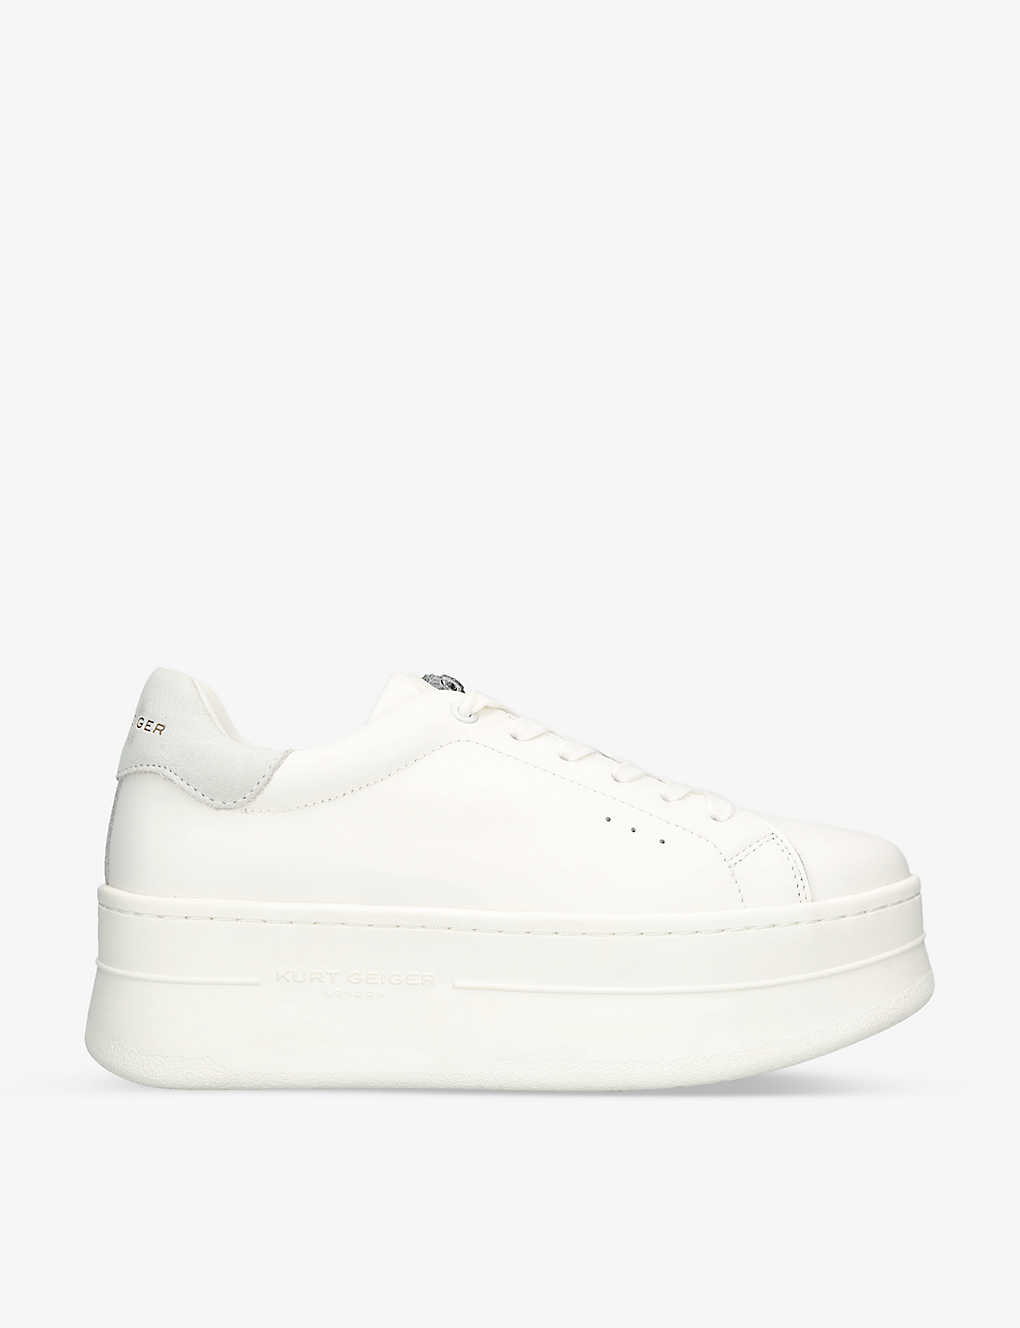 Kurt Geiger Leather Laney Pumped Sneakers In White